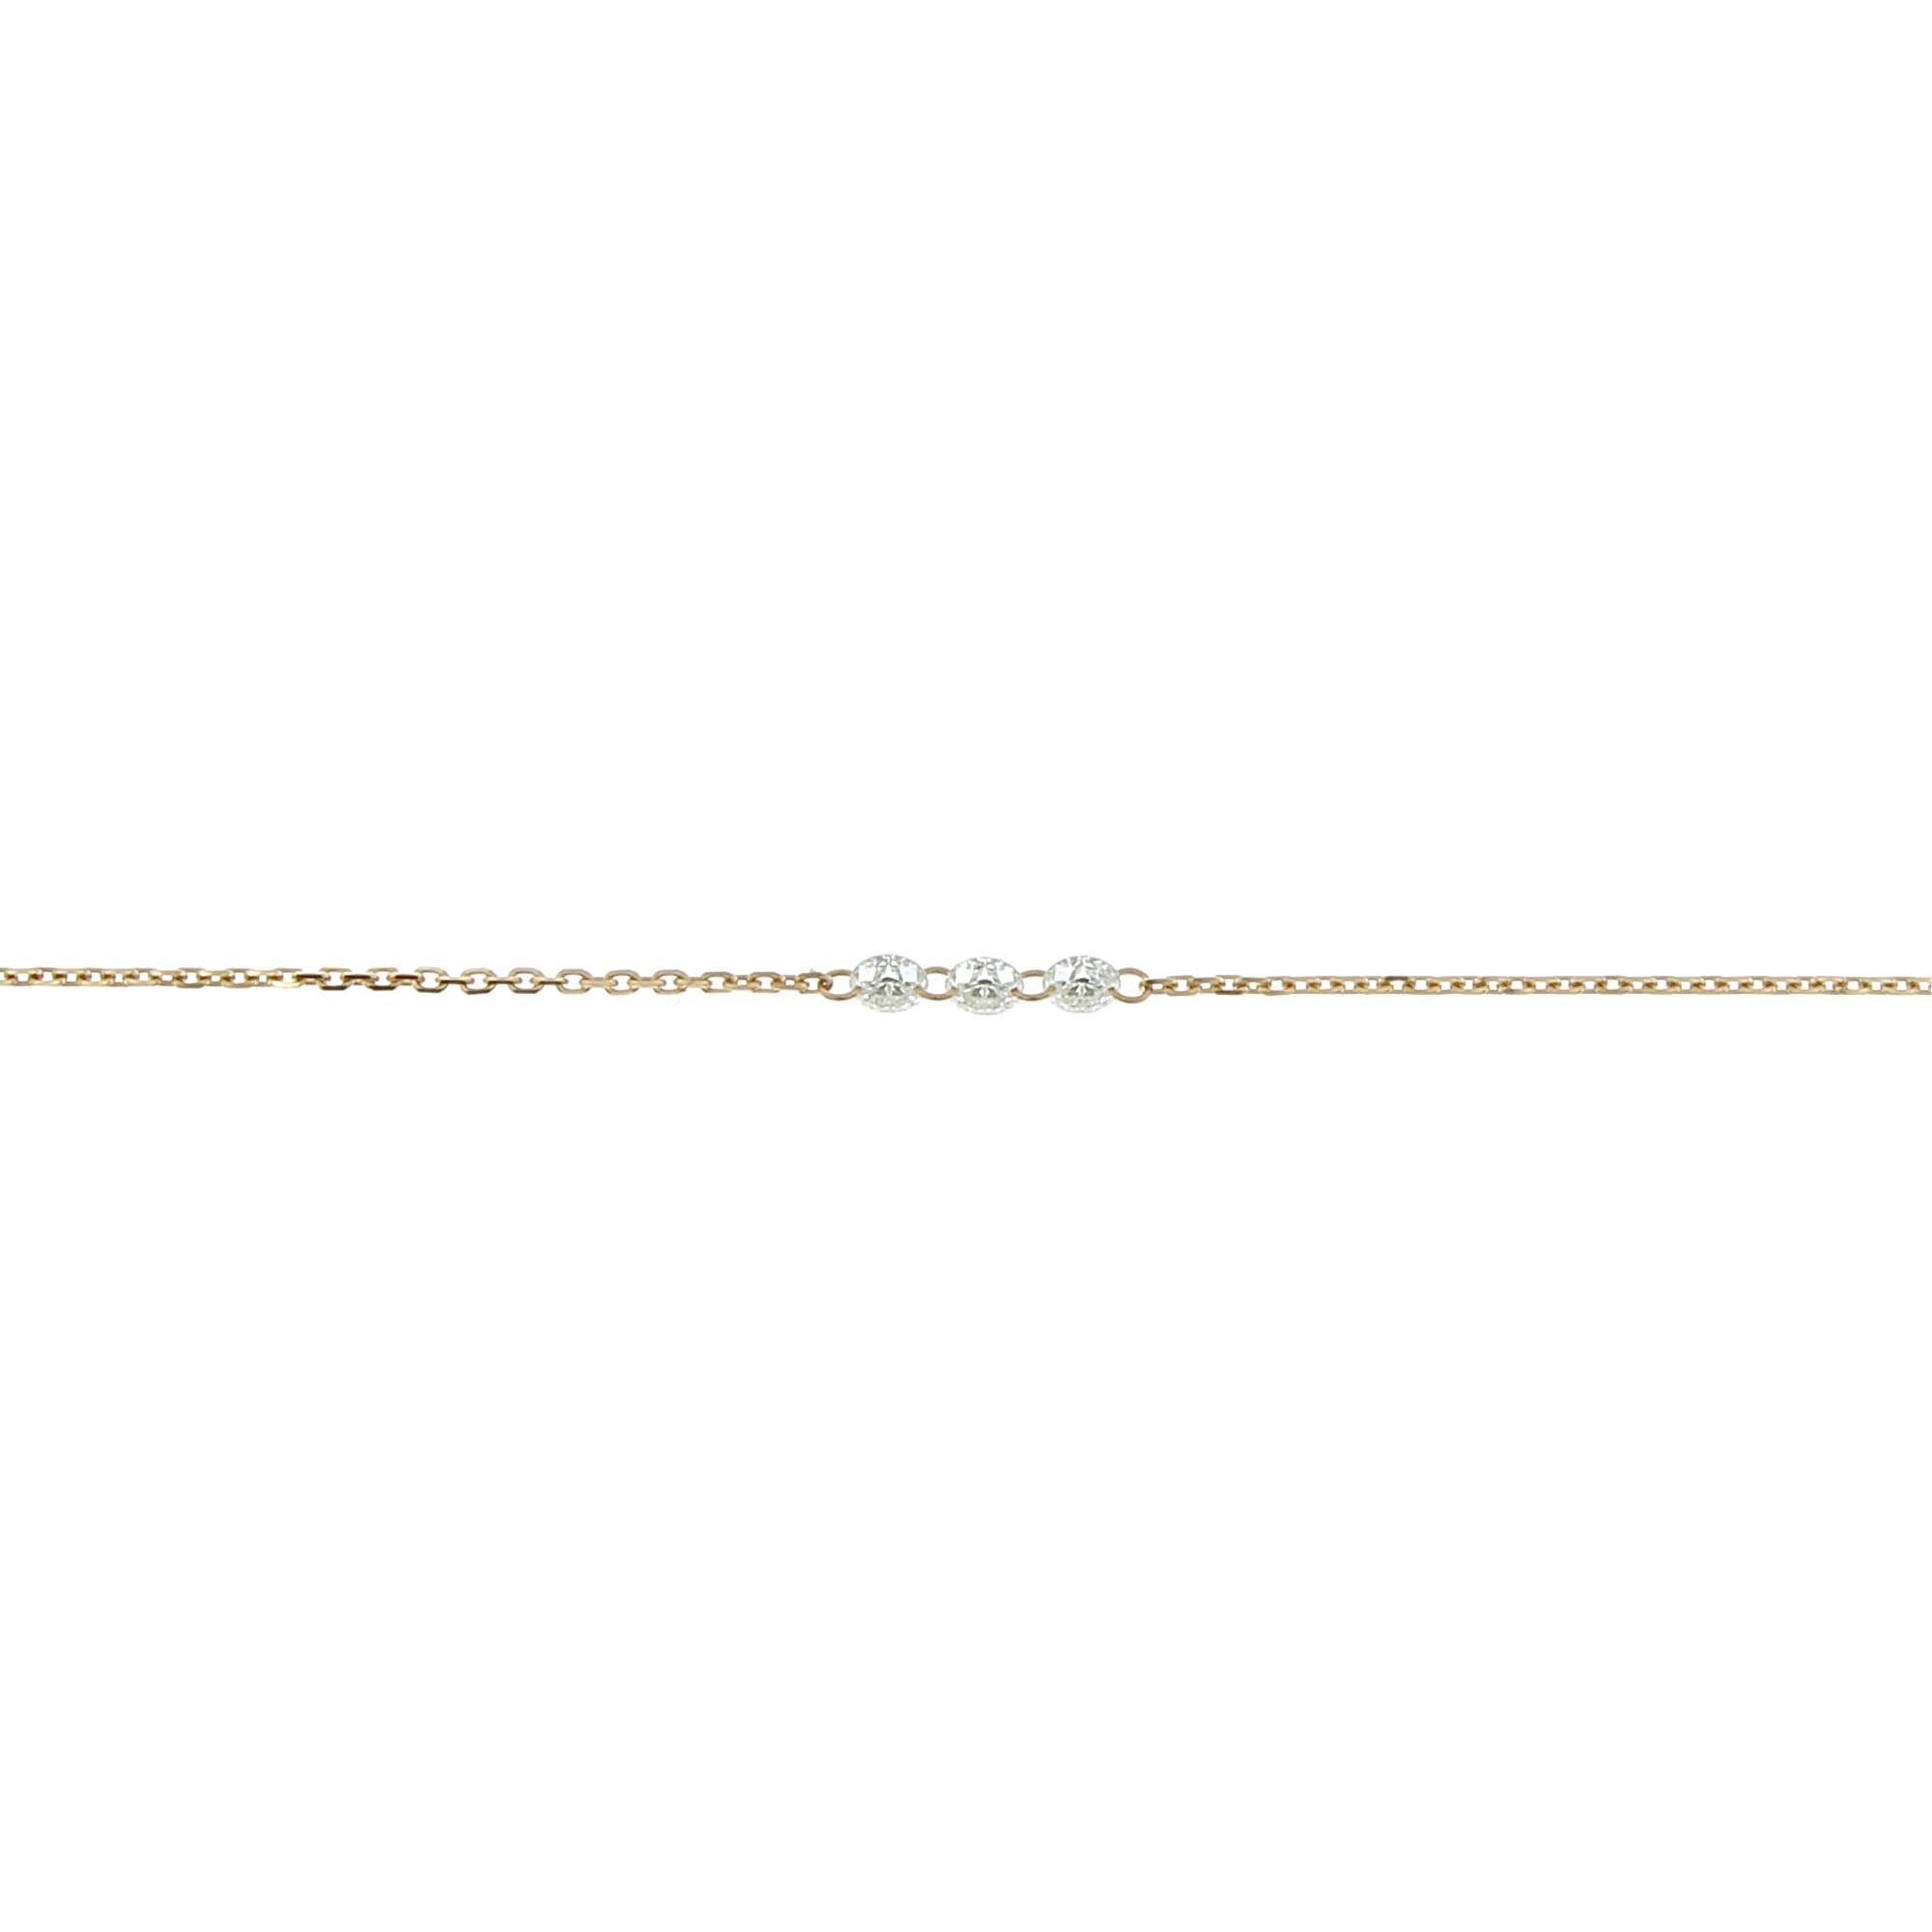 3mm rose gold Diamond Encrusted Necklace 